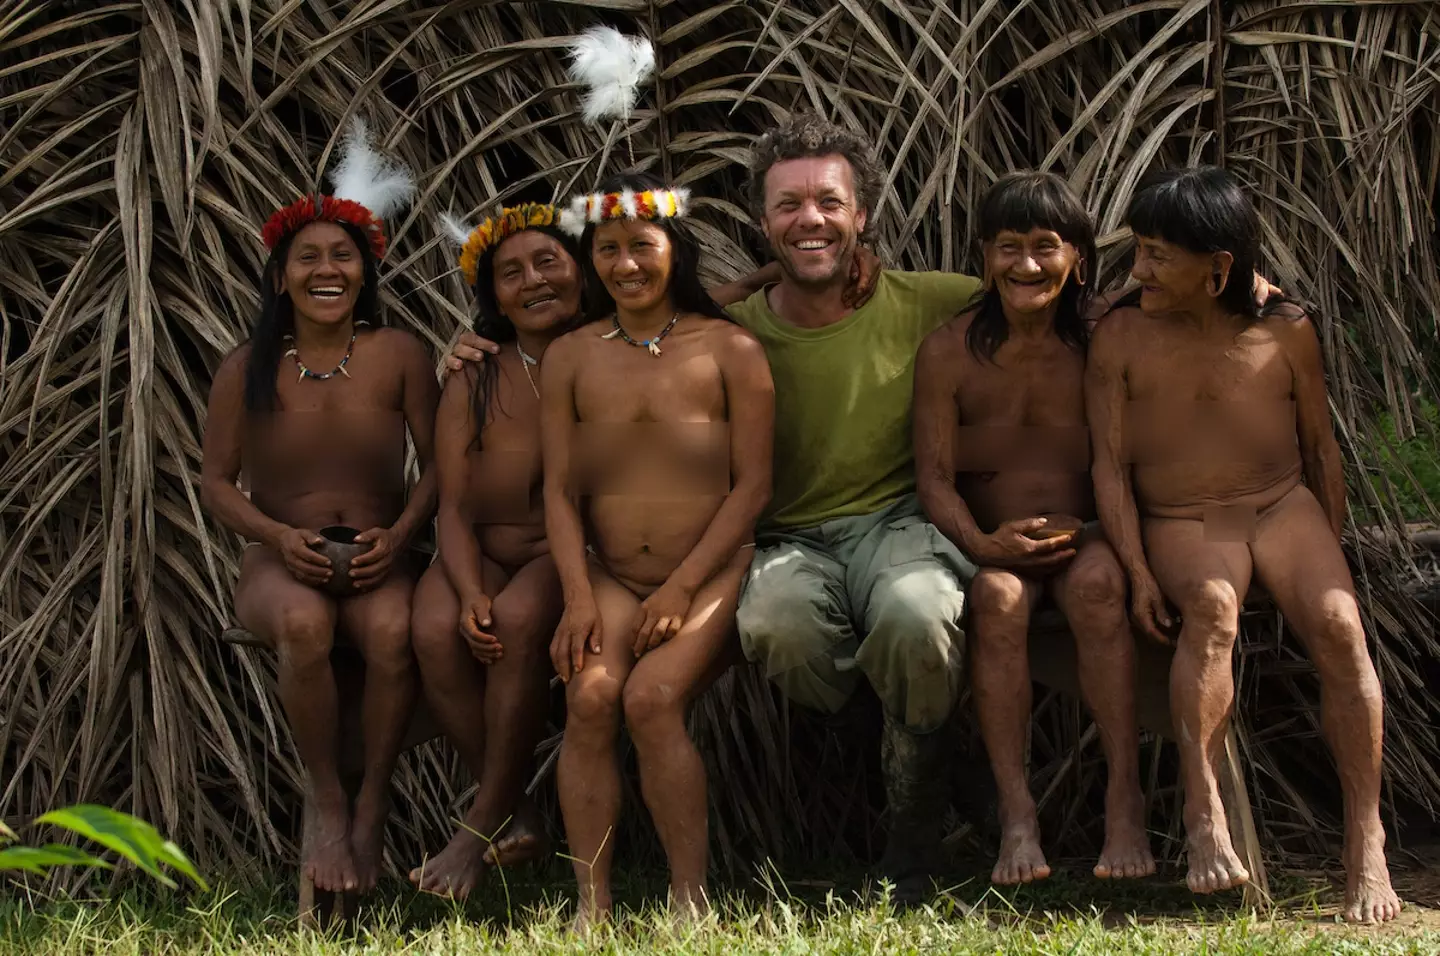 Photographer Pete Oxford seen with some of the tribe's women.